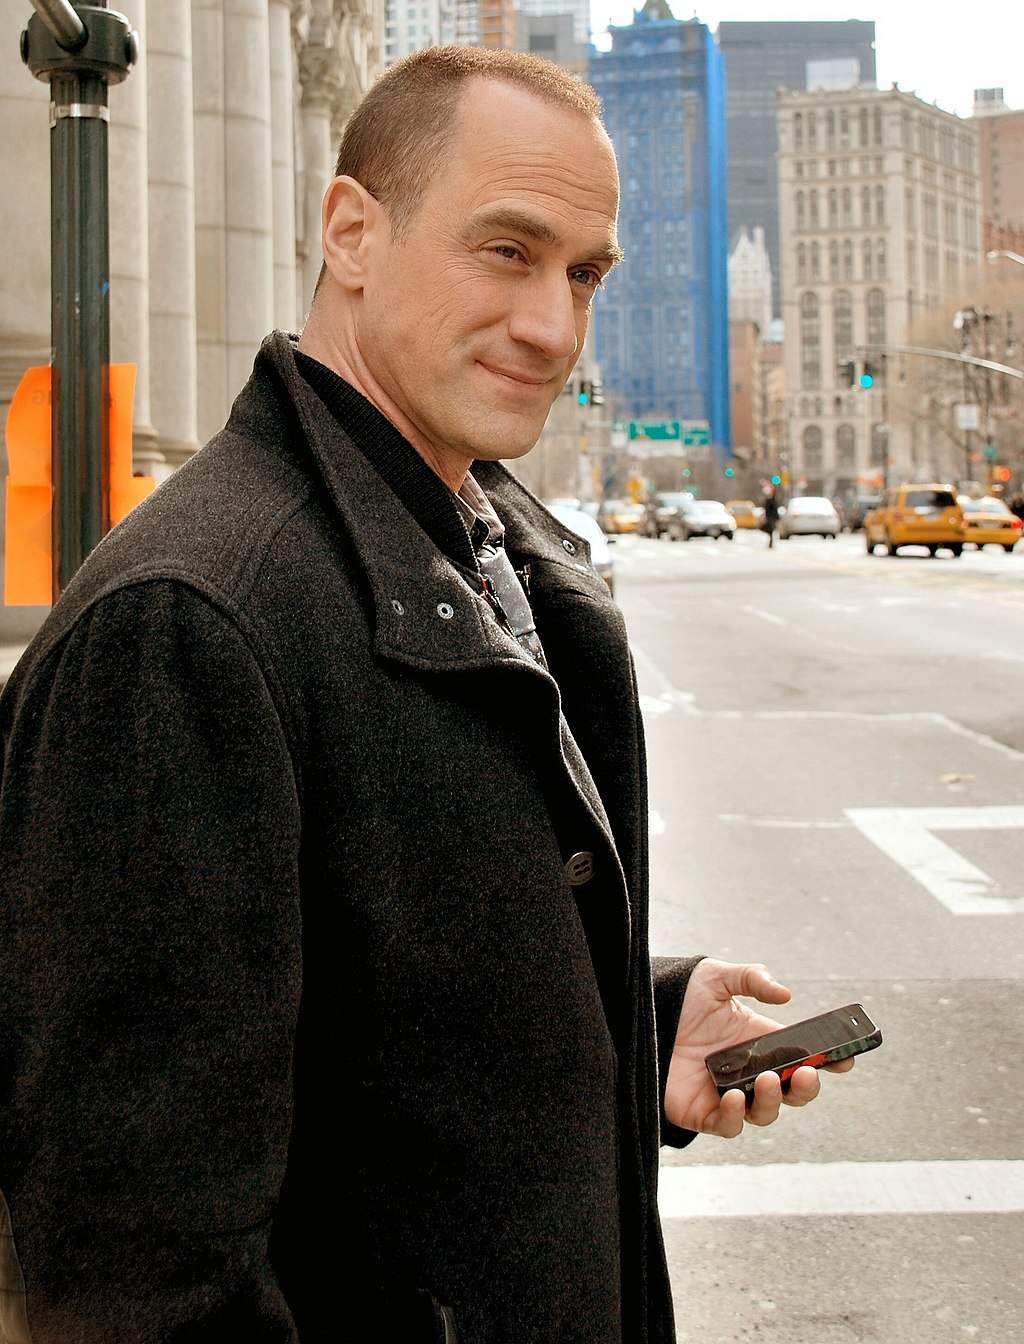 Actor Christopher Meloni dressed as his Detective Stabler character, wearing a long black overcoat.